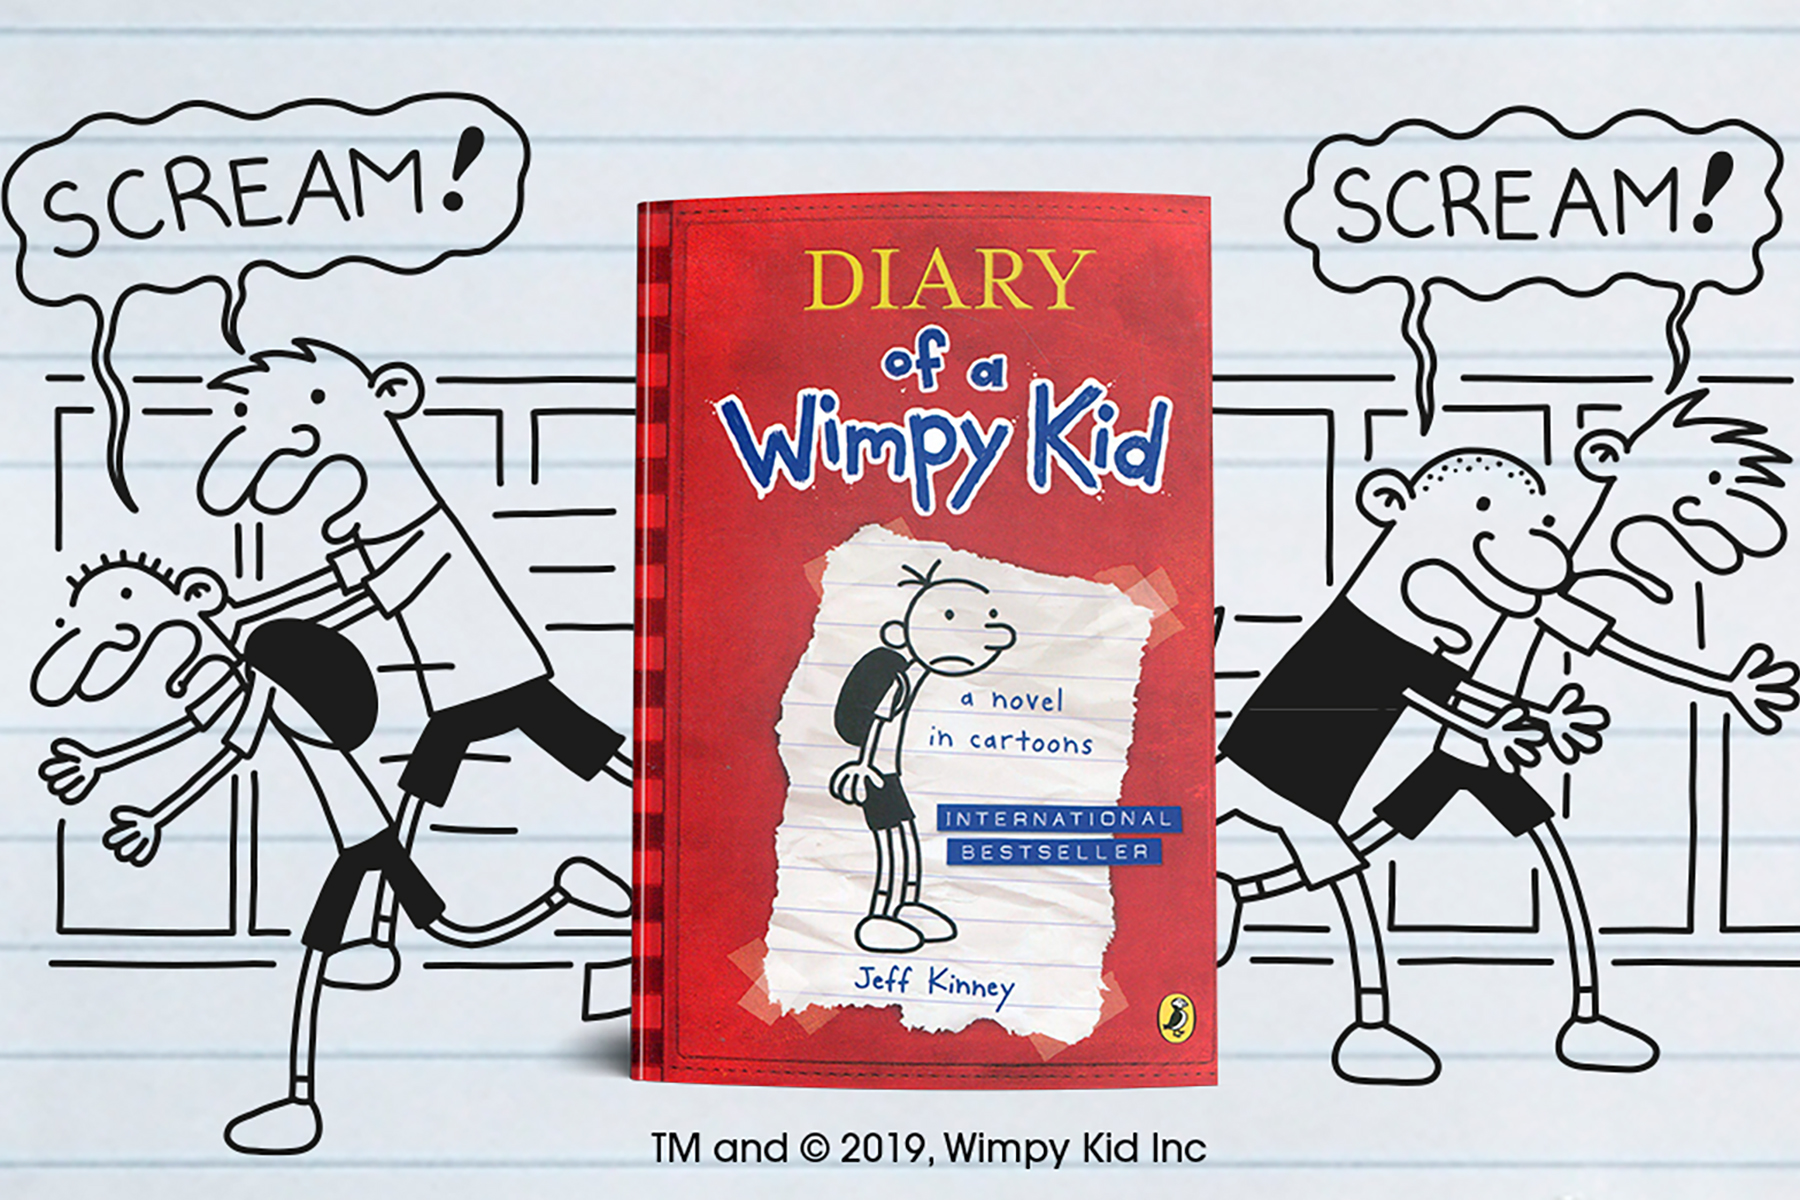 An illustration from the Diary of Wimpy Kid books by Jeff Kinney